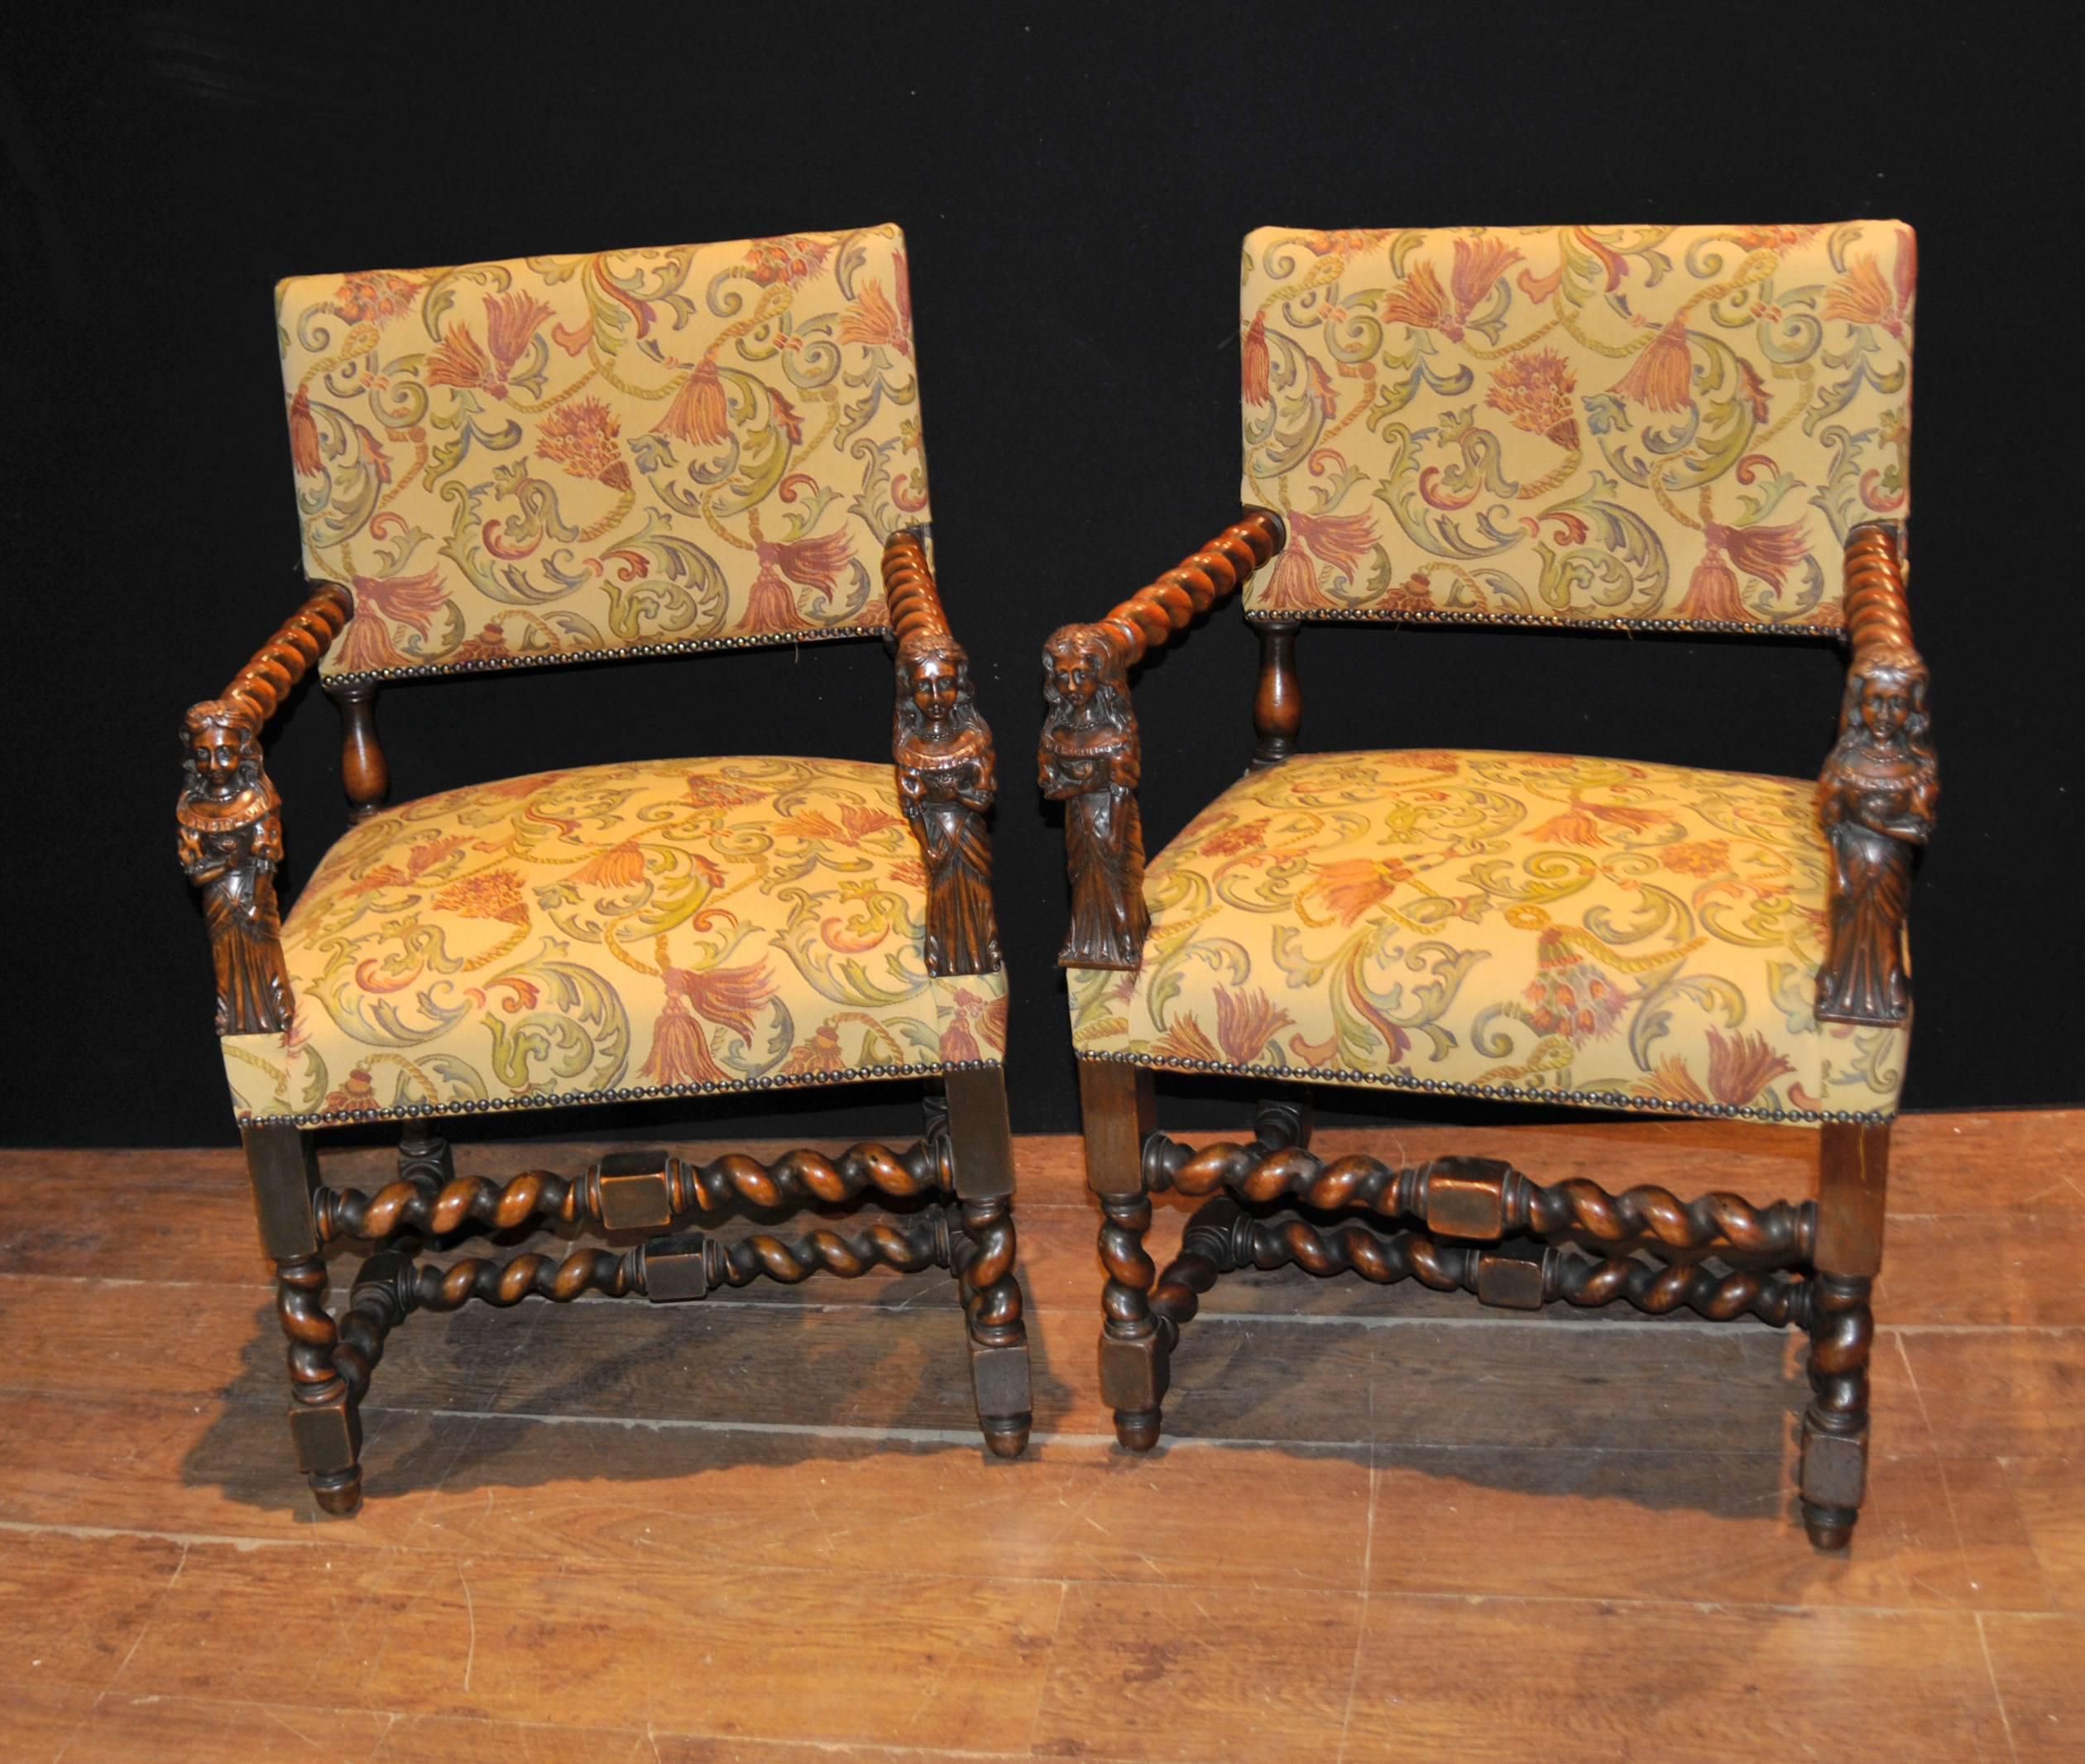 One of my favourite finds right now, gorgeous pair of antique Italian armchairs. We date these to circa 1860. Hand-carved chairs, just look at the arms with the female figurine motif. Then of course the barley twist design to arms, legs and